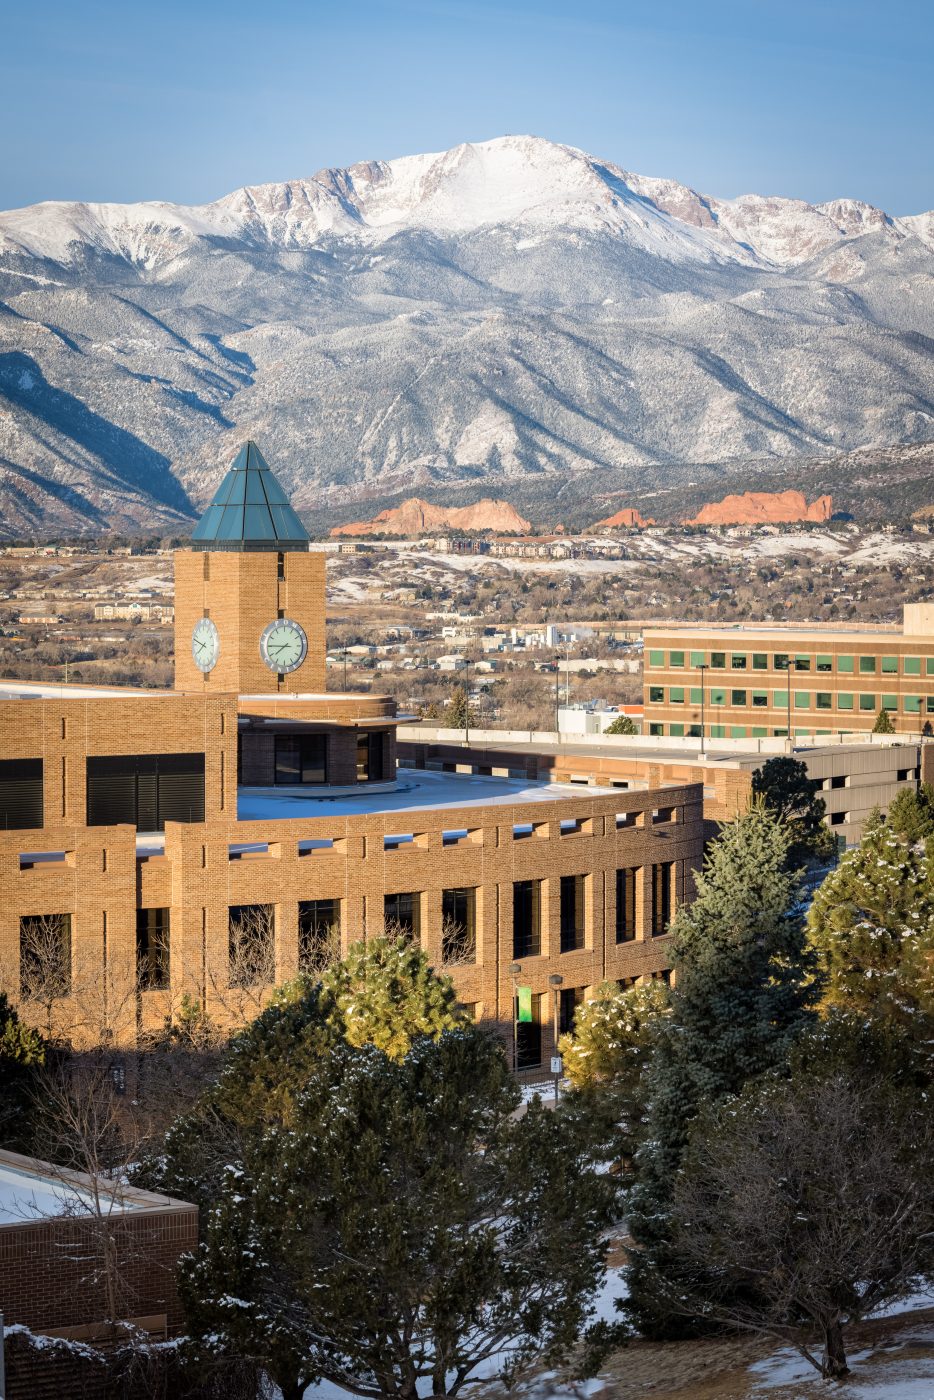 A snow-covered El Pomar Center on the UCCS campus in front of Pikes Peak. Photo by Jeffrey M Foster